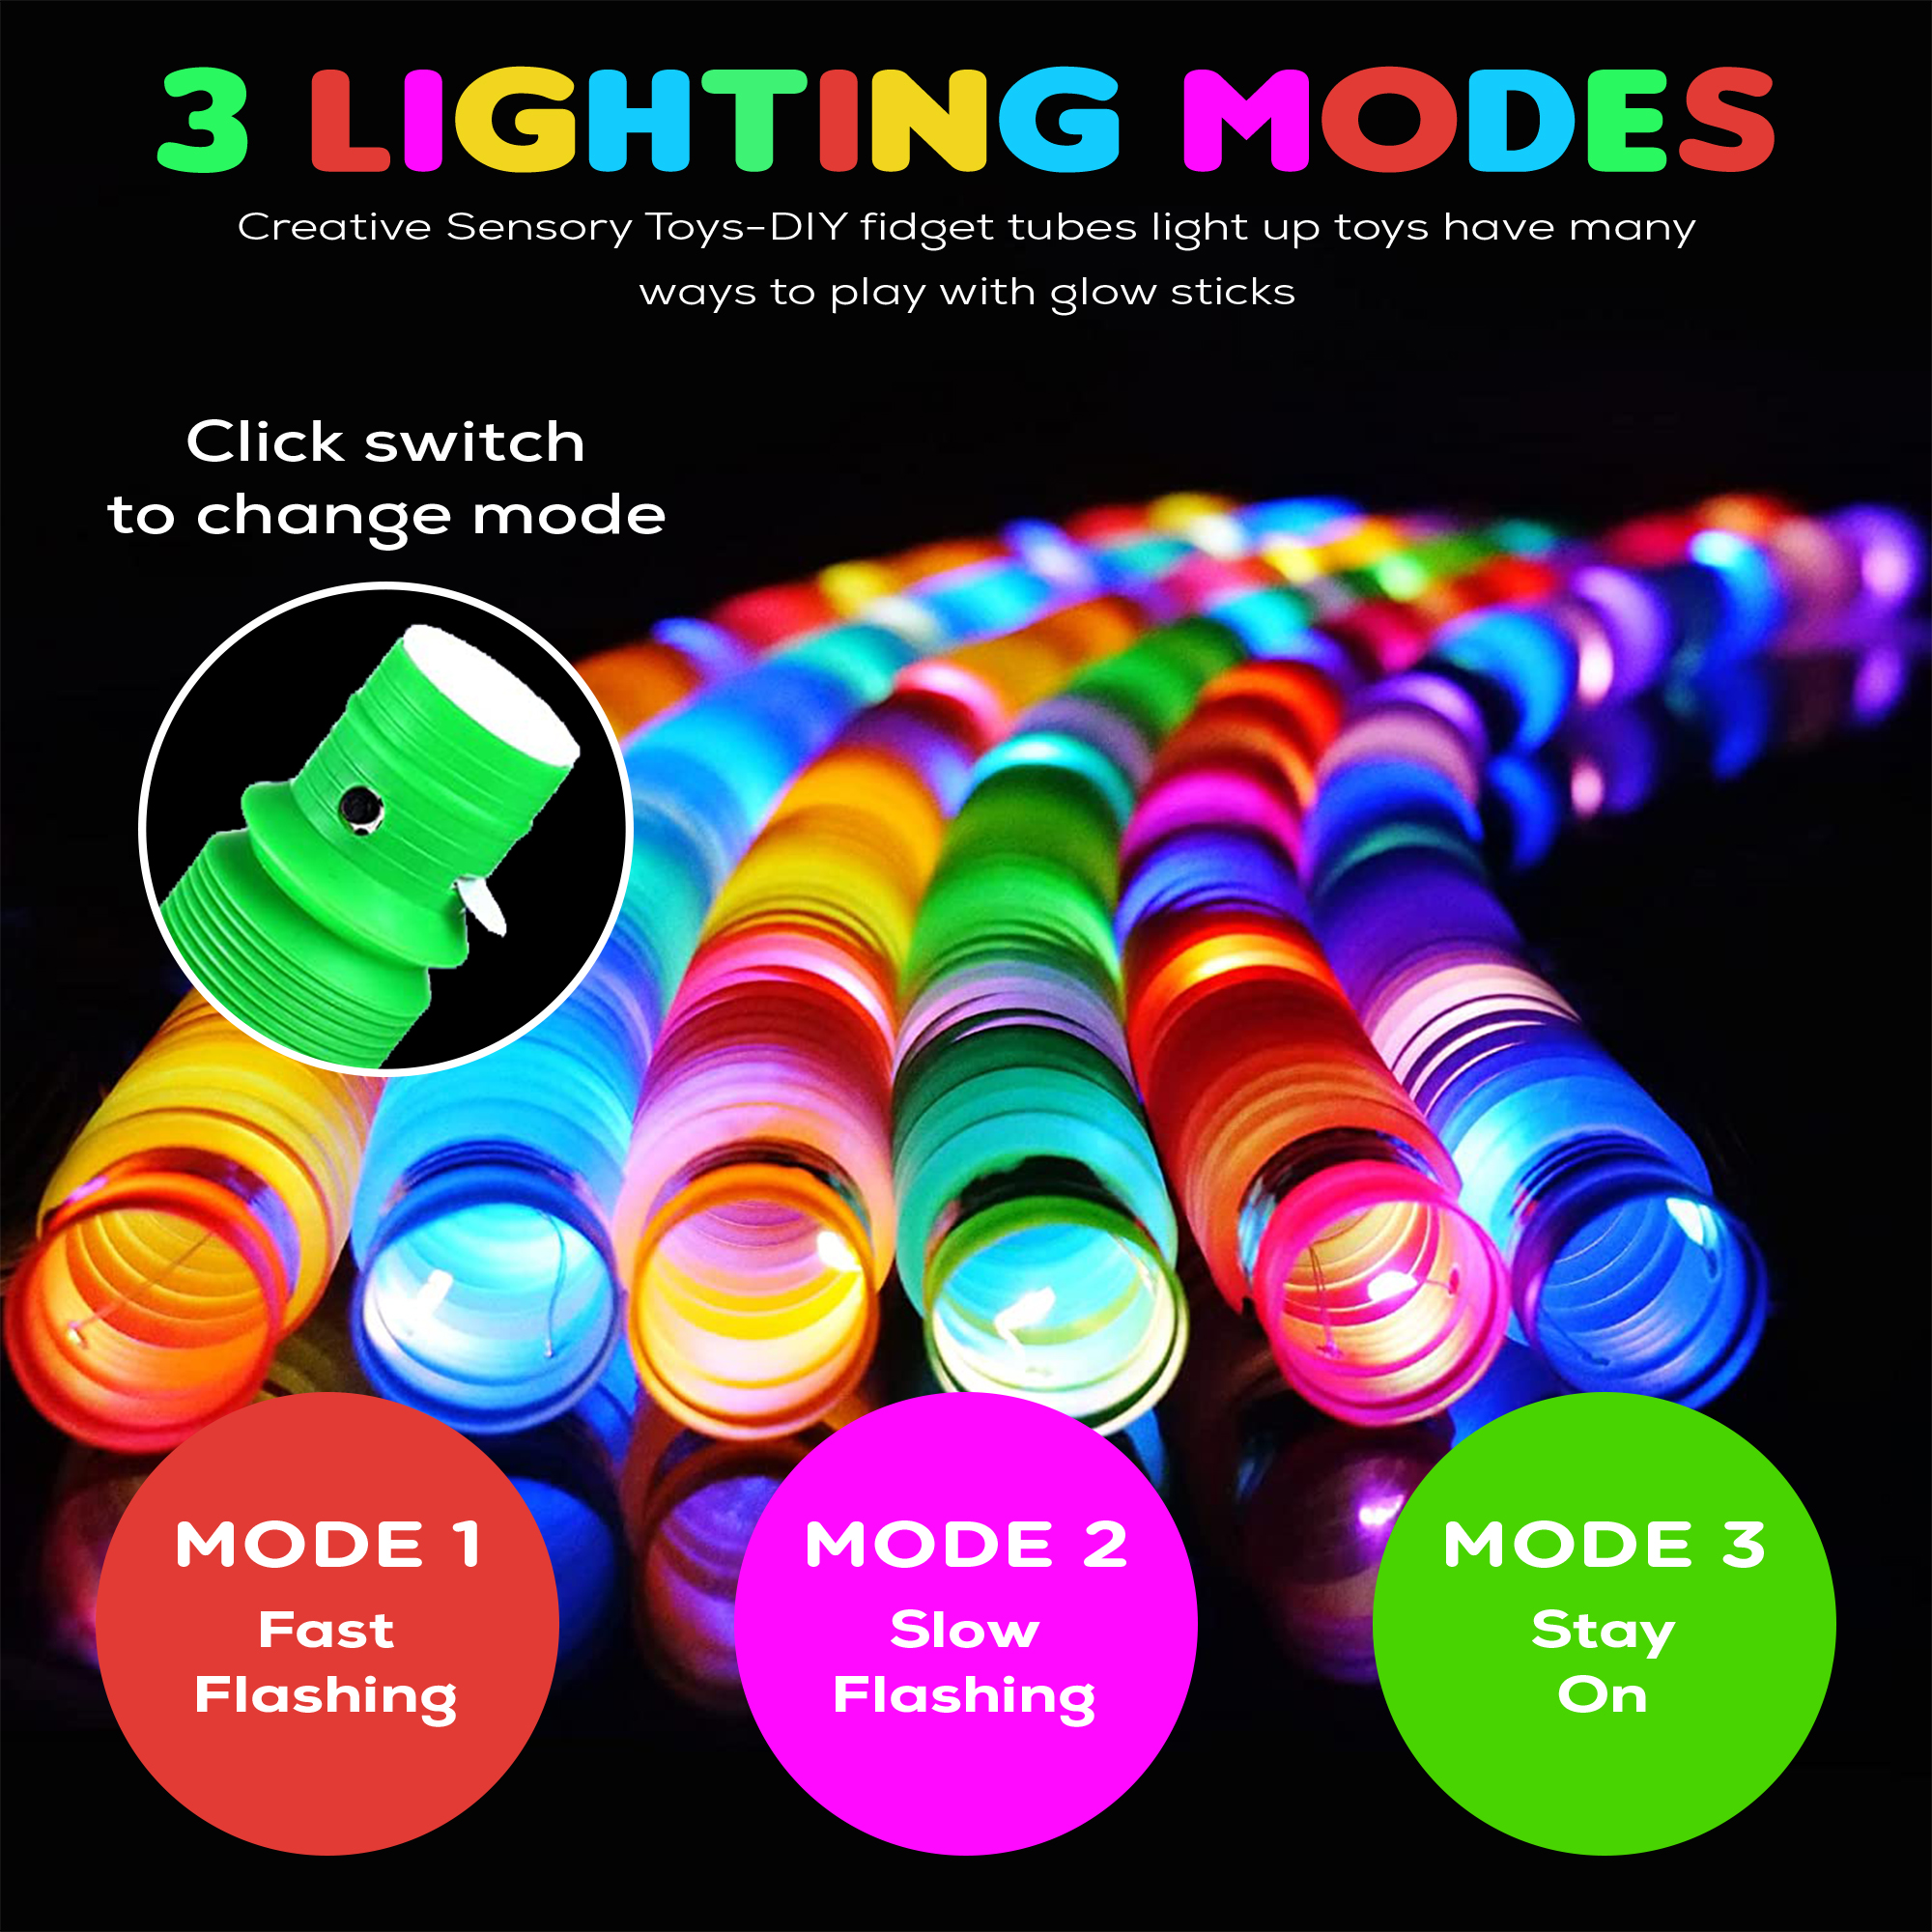 21 Pack LED Glow Tubes Halloween Party Favors Pop It Sticks Sensory Fidget Toy Light Up In The Dark Connectors for Bracelets, Pull And Stretch Toys Dance Disco Wedding Birthday Raves Concert Camping - image 5 of 7